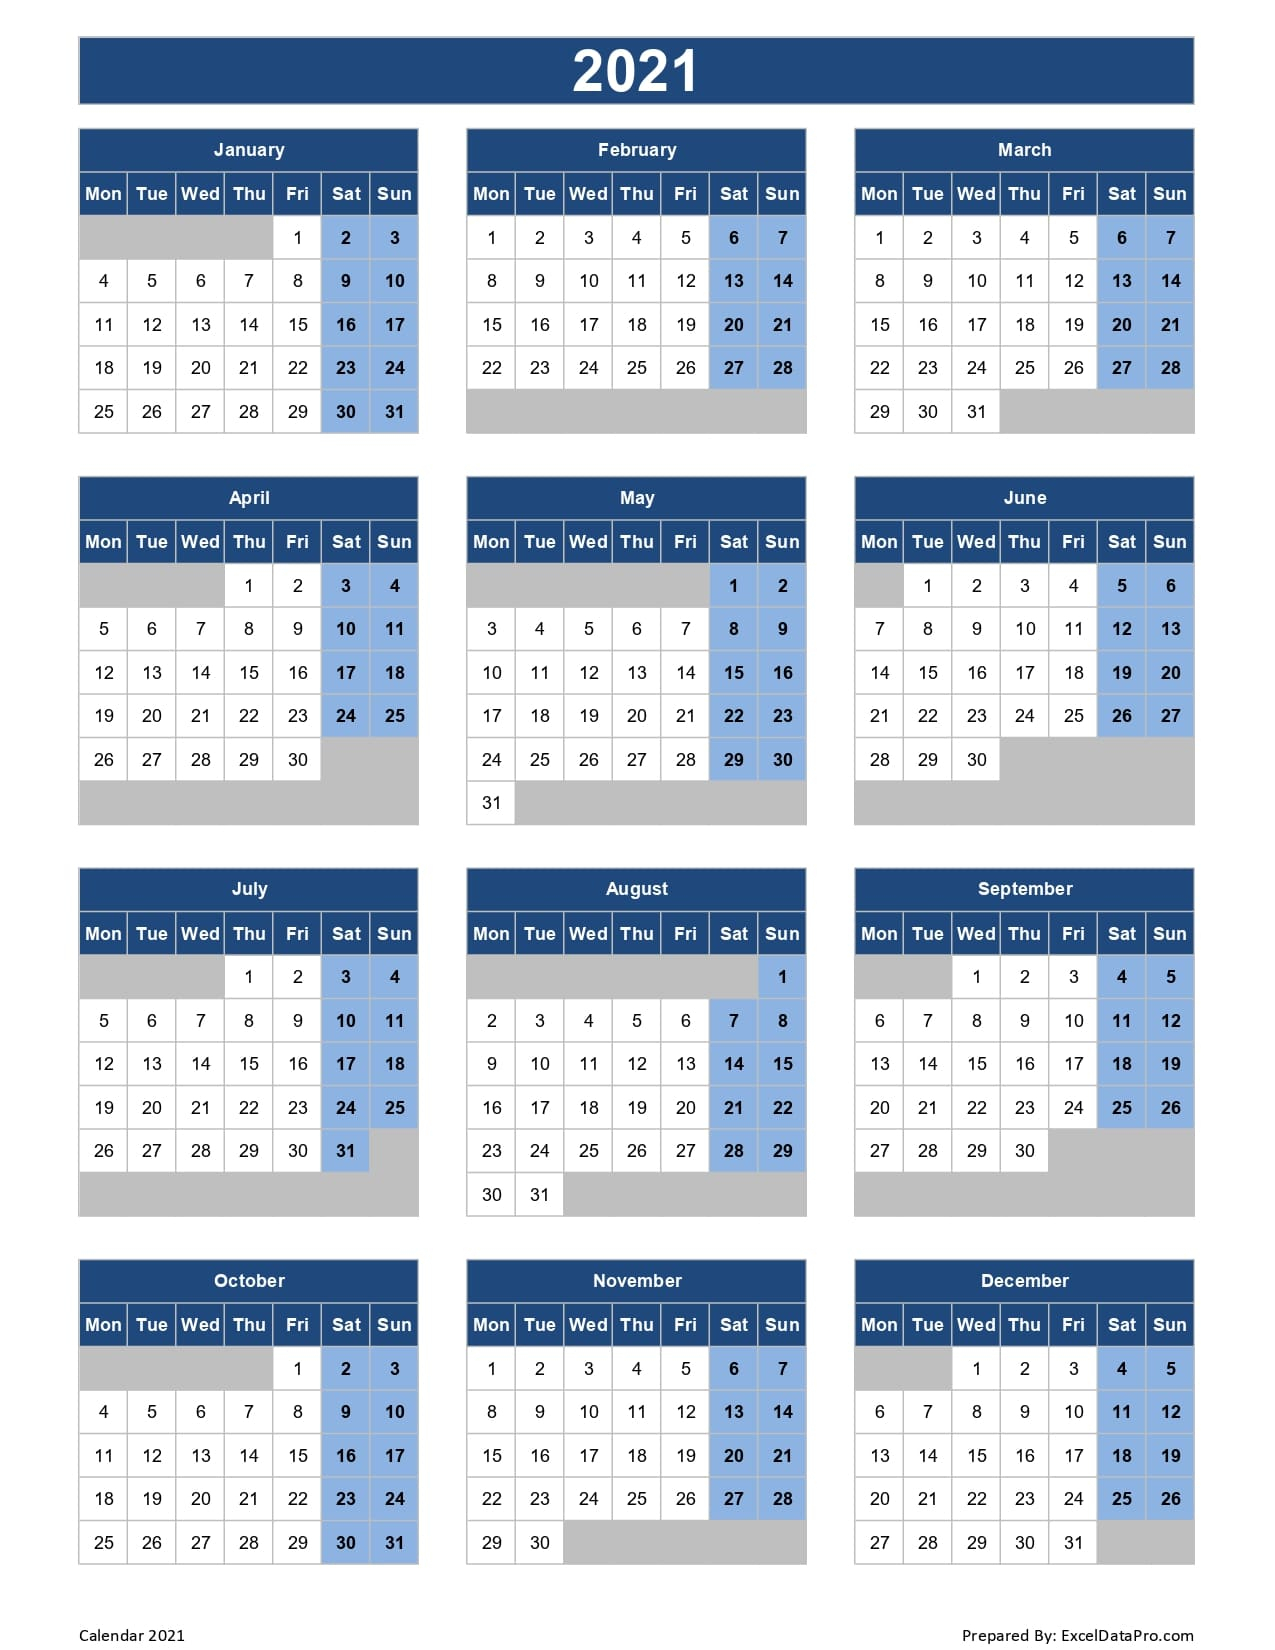 Download 2021 Yearly Calendar (Mon Start) Excel Template - Exceldatapro